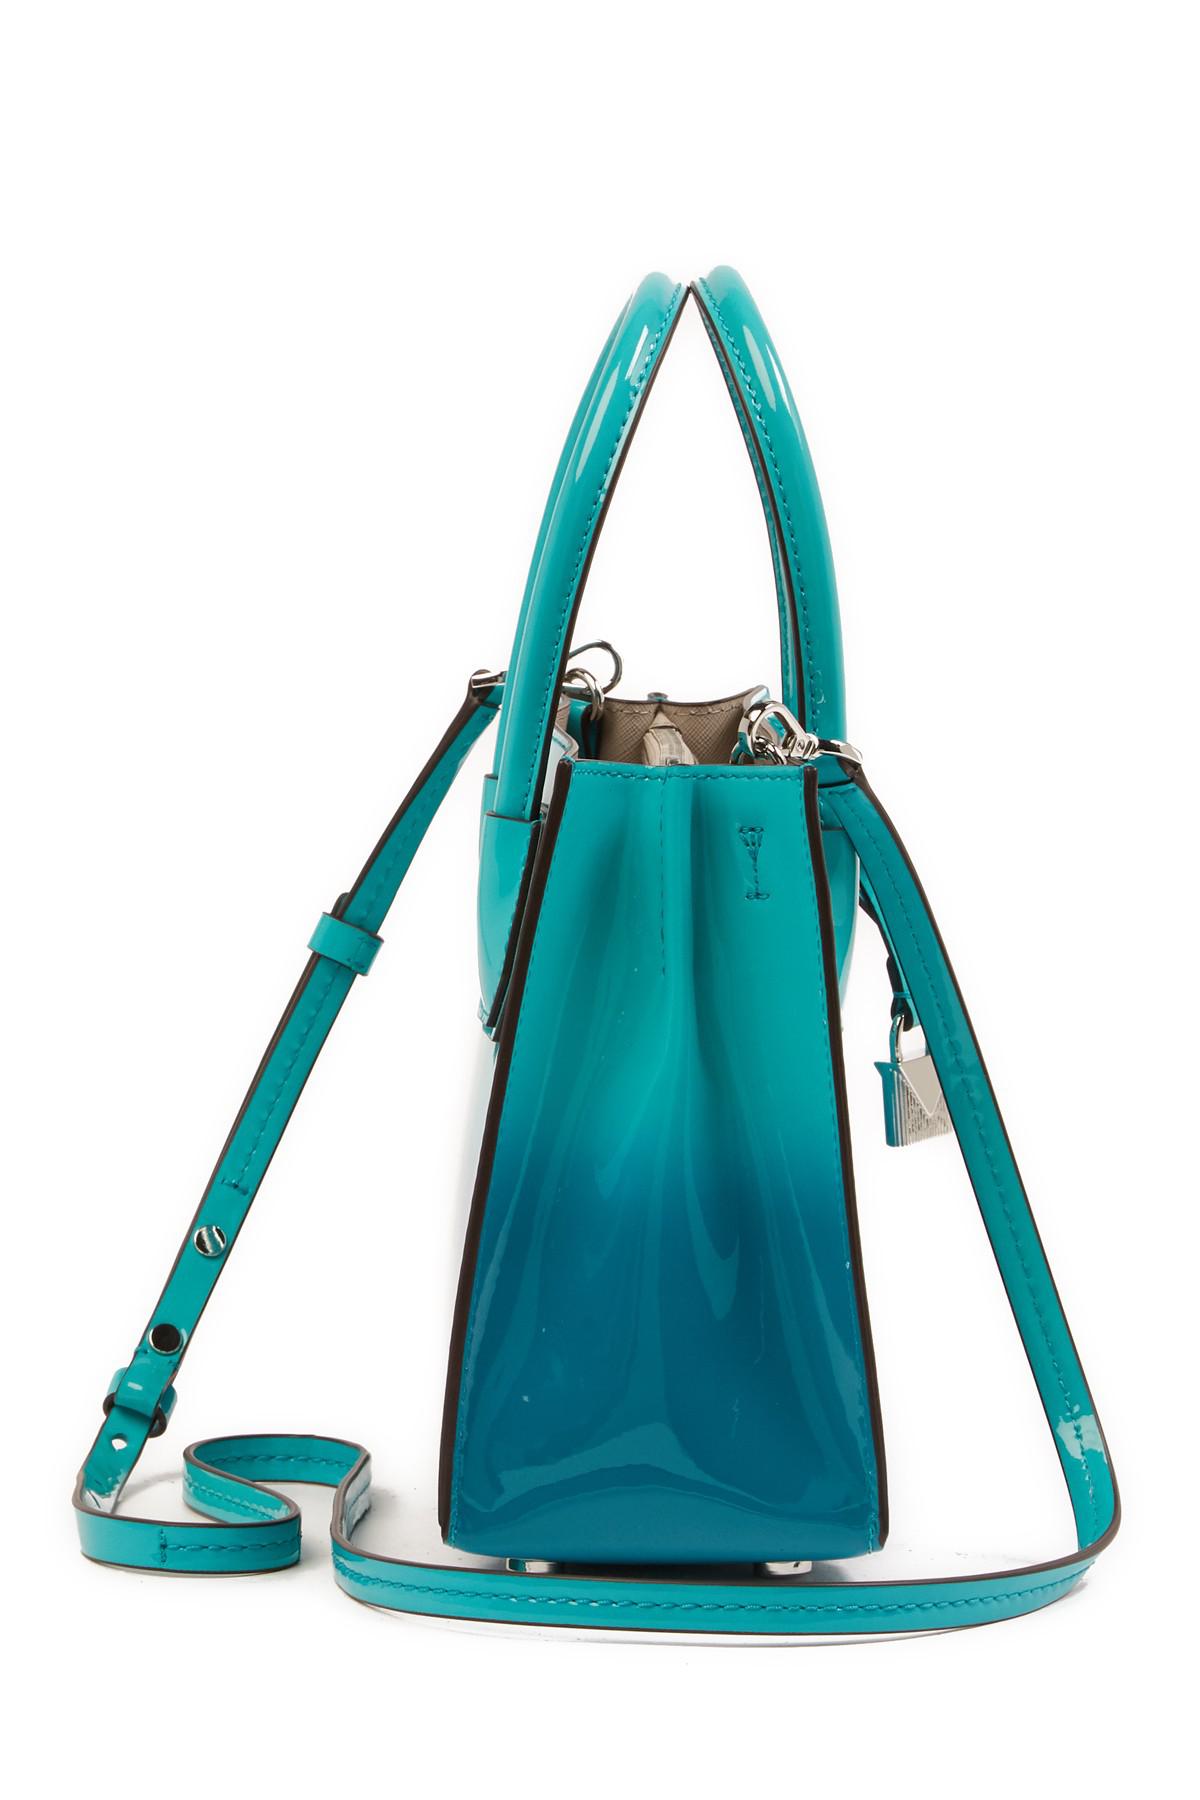 Ombre Canvas Tote Bag With Leather Handles Ocean Blue Ready 